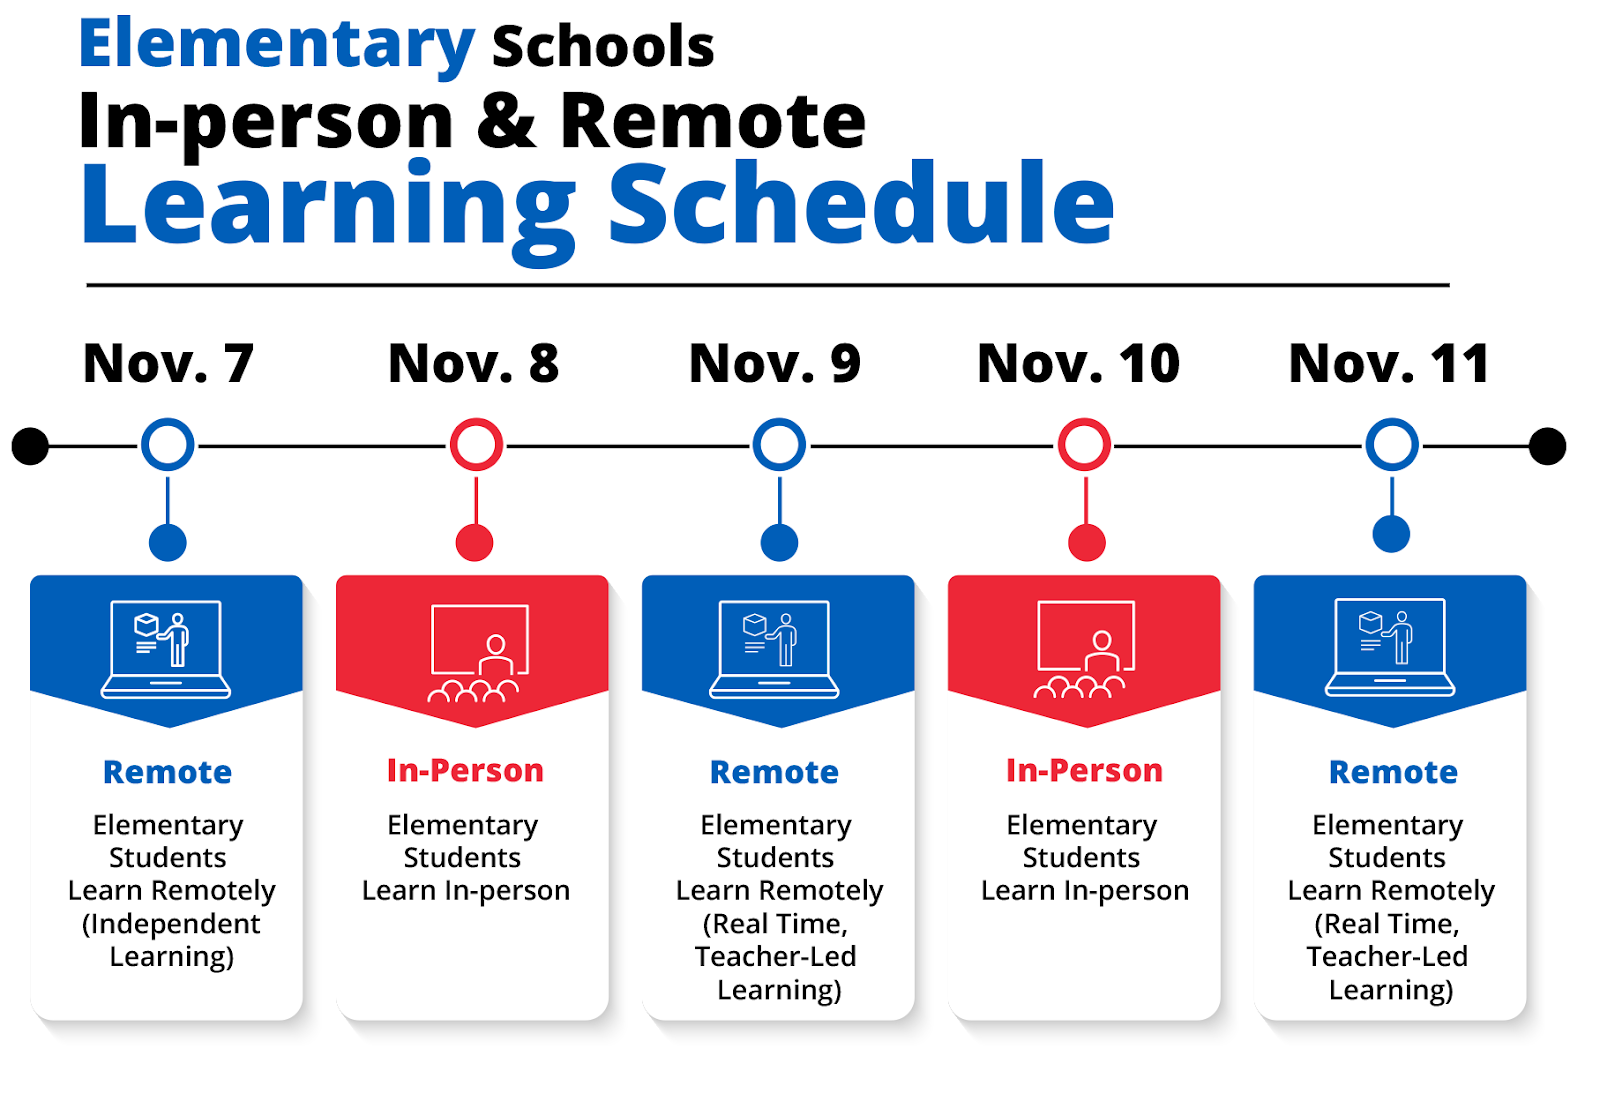 HDSB Elementary Schools learning is day 1 in-person, learning, day 2 remote learning, day 1 in-person etc.